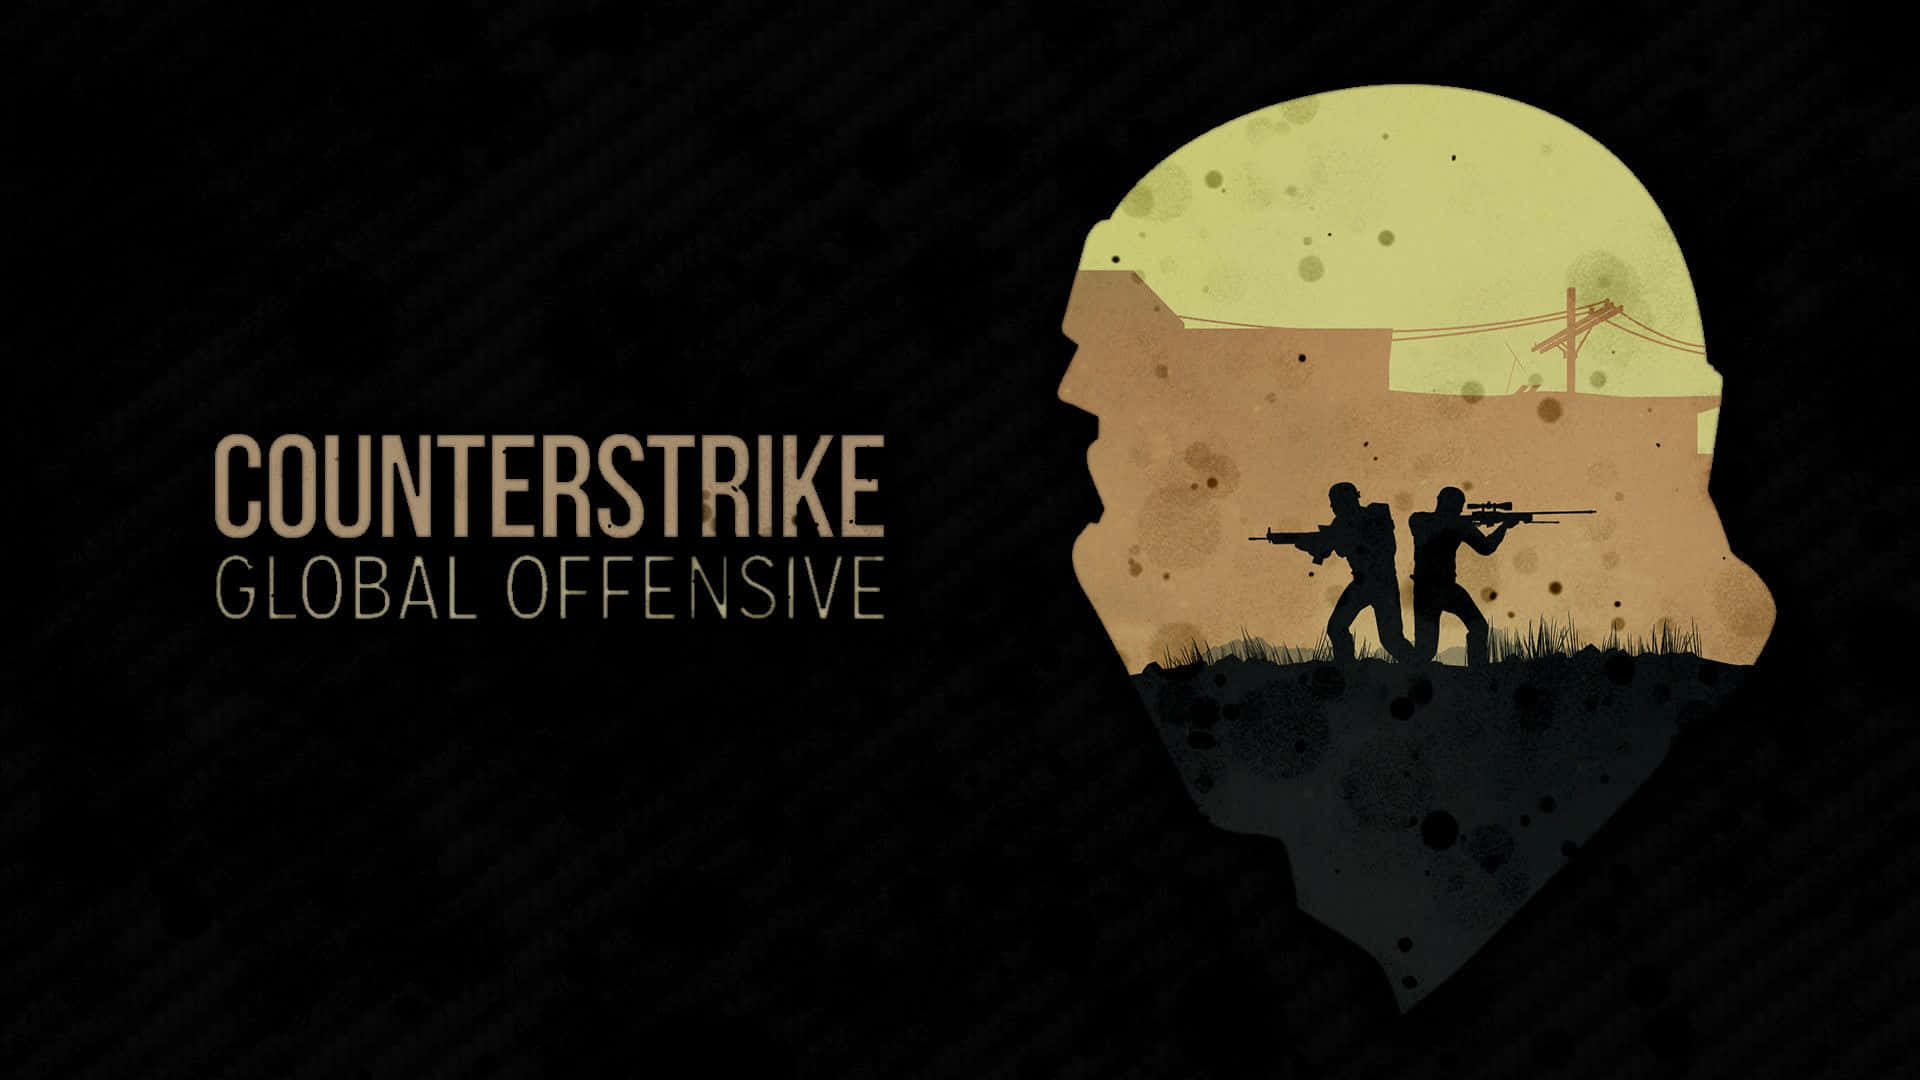 Counter-Strike: Global Offensive building a competitive gaming team Wallpaper